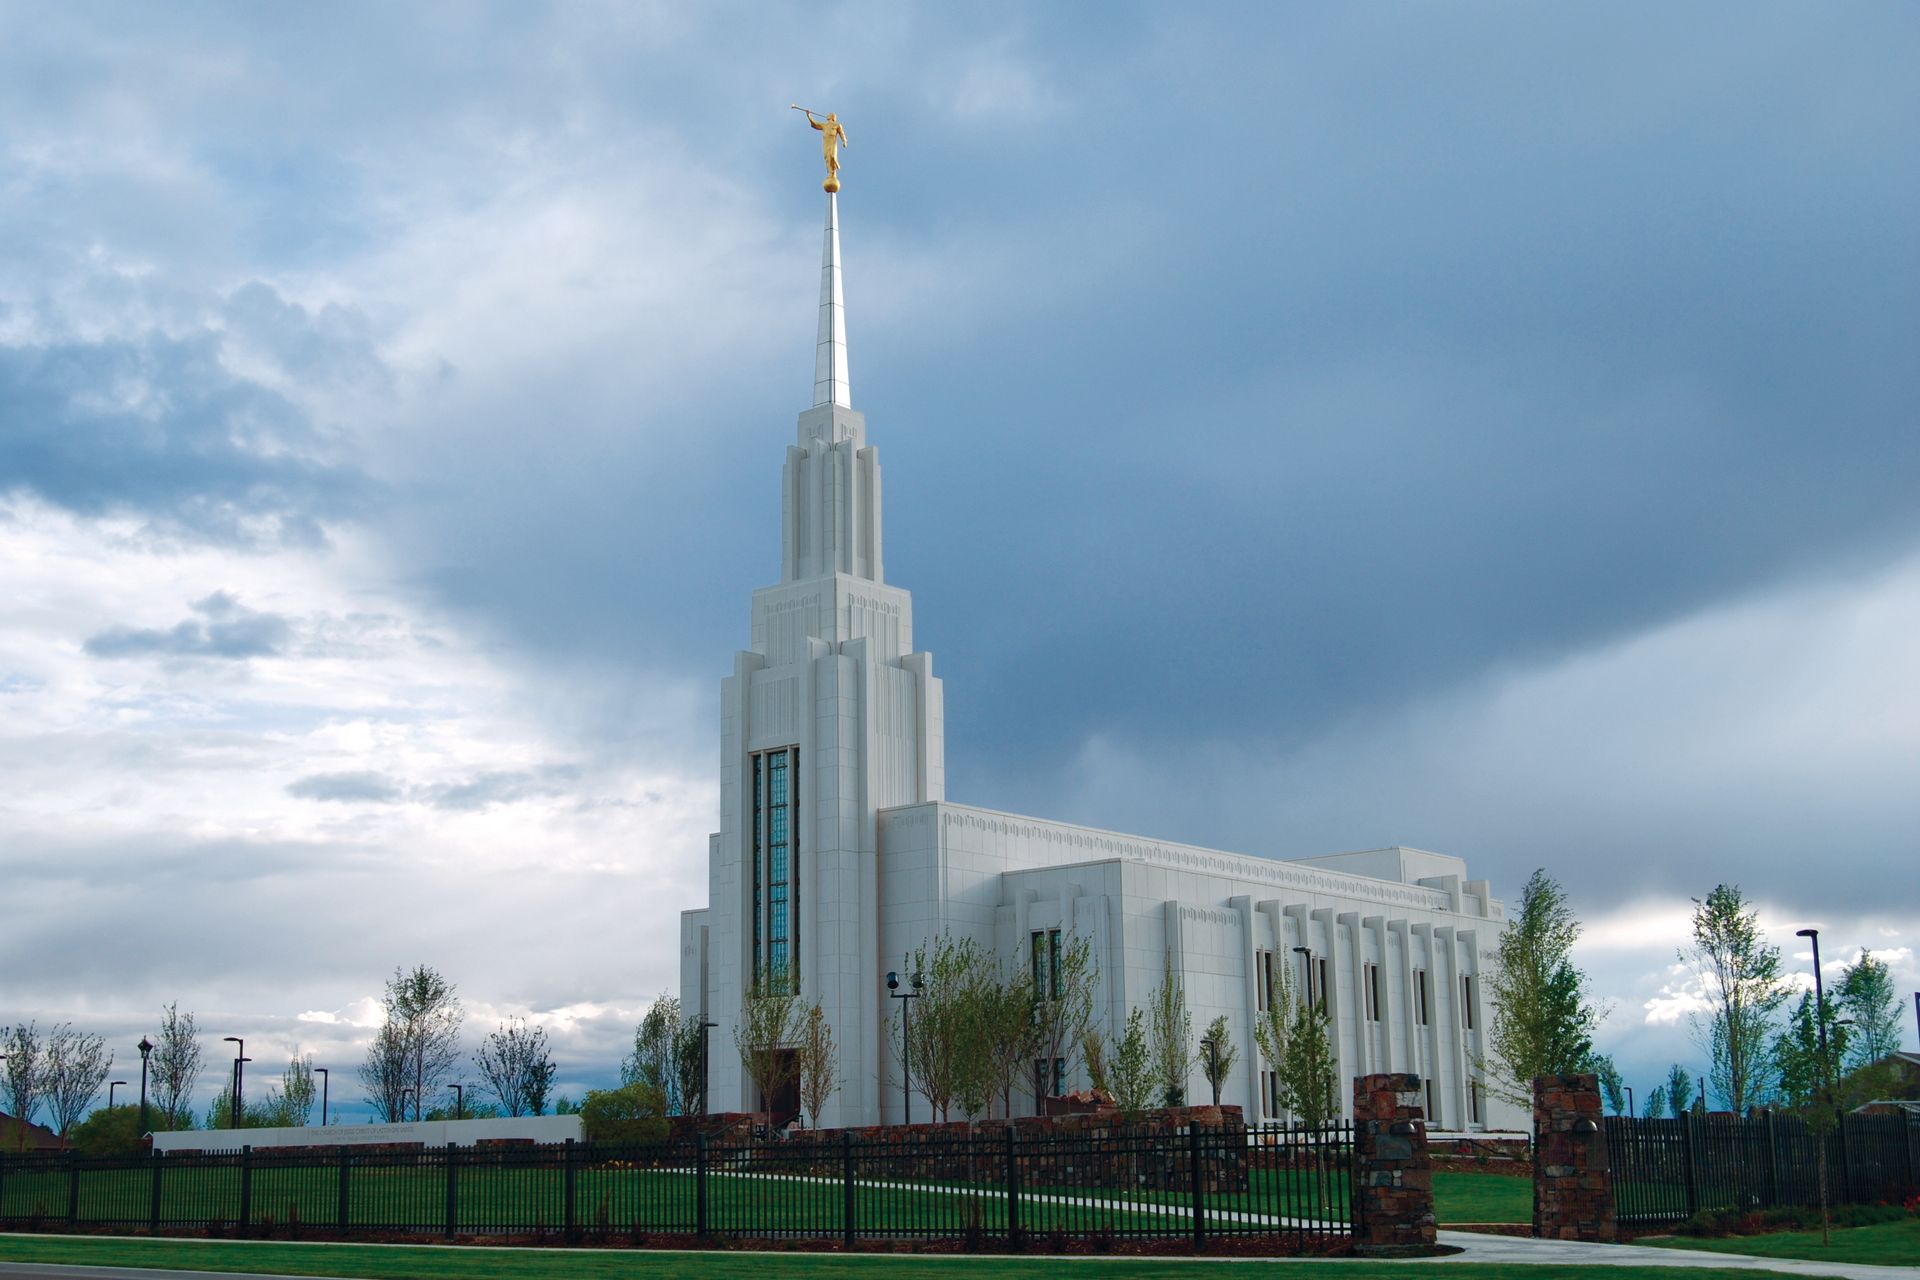 The Twin Falls Idaho Temple on a cloudy day.